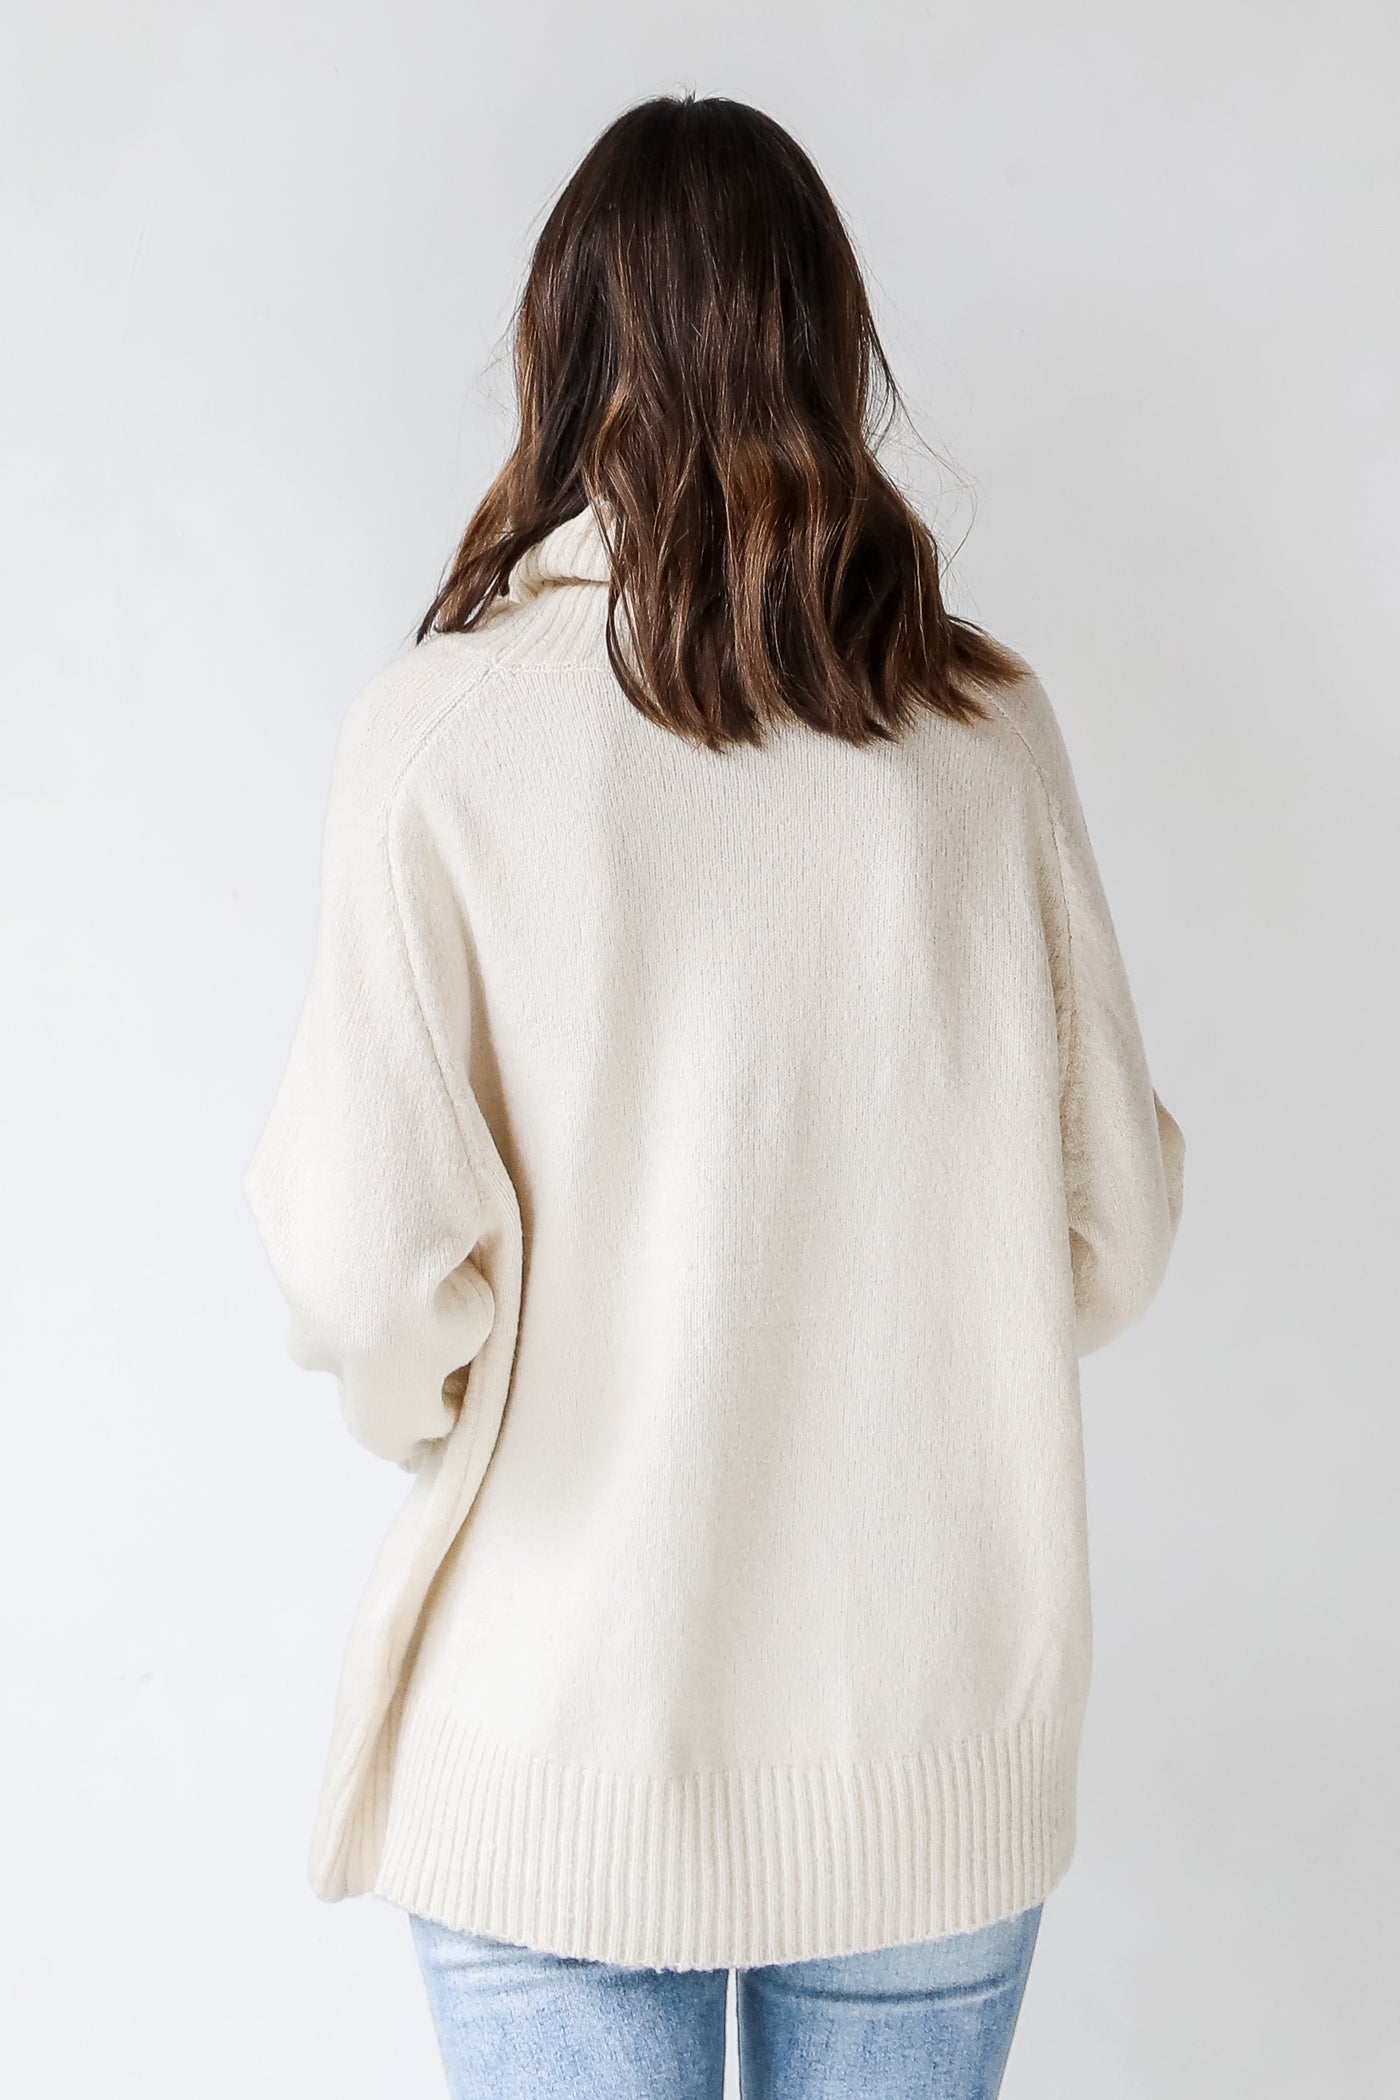 Turtleneck Sweater in ivory back view